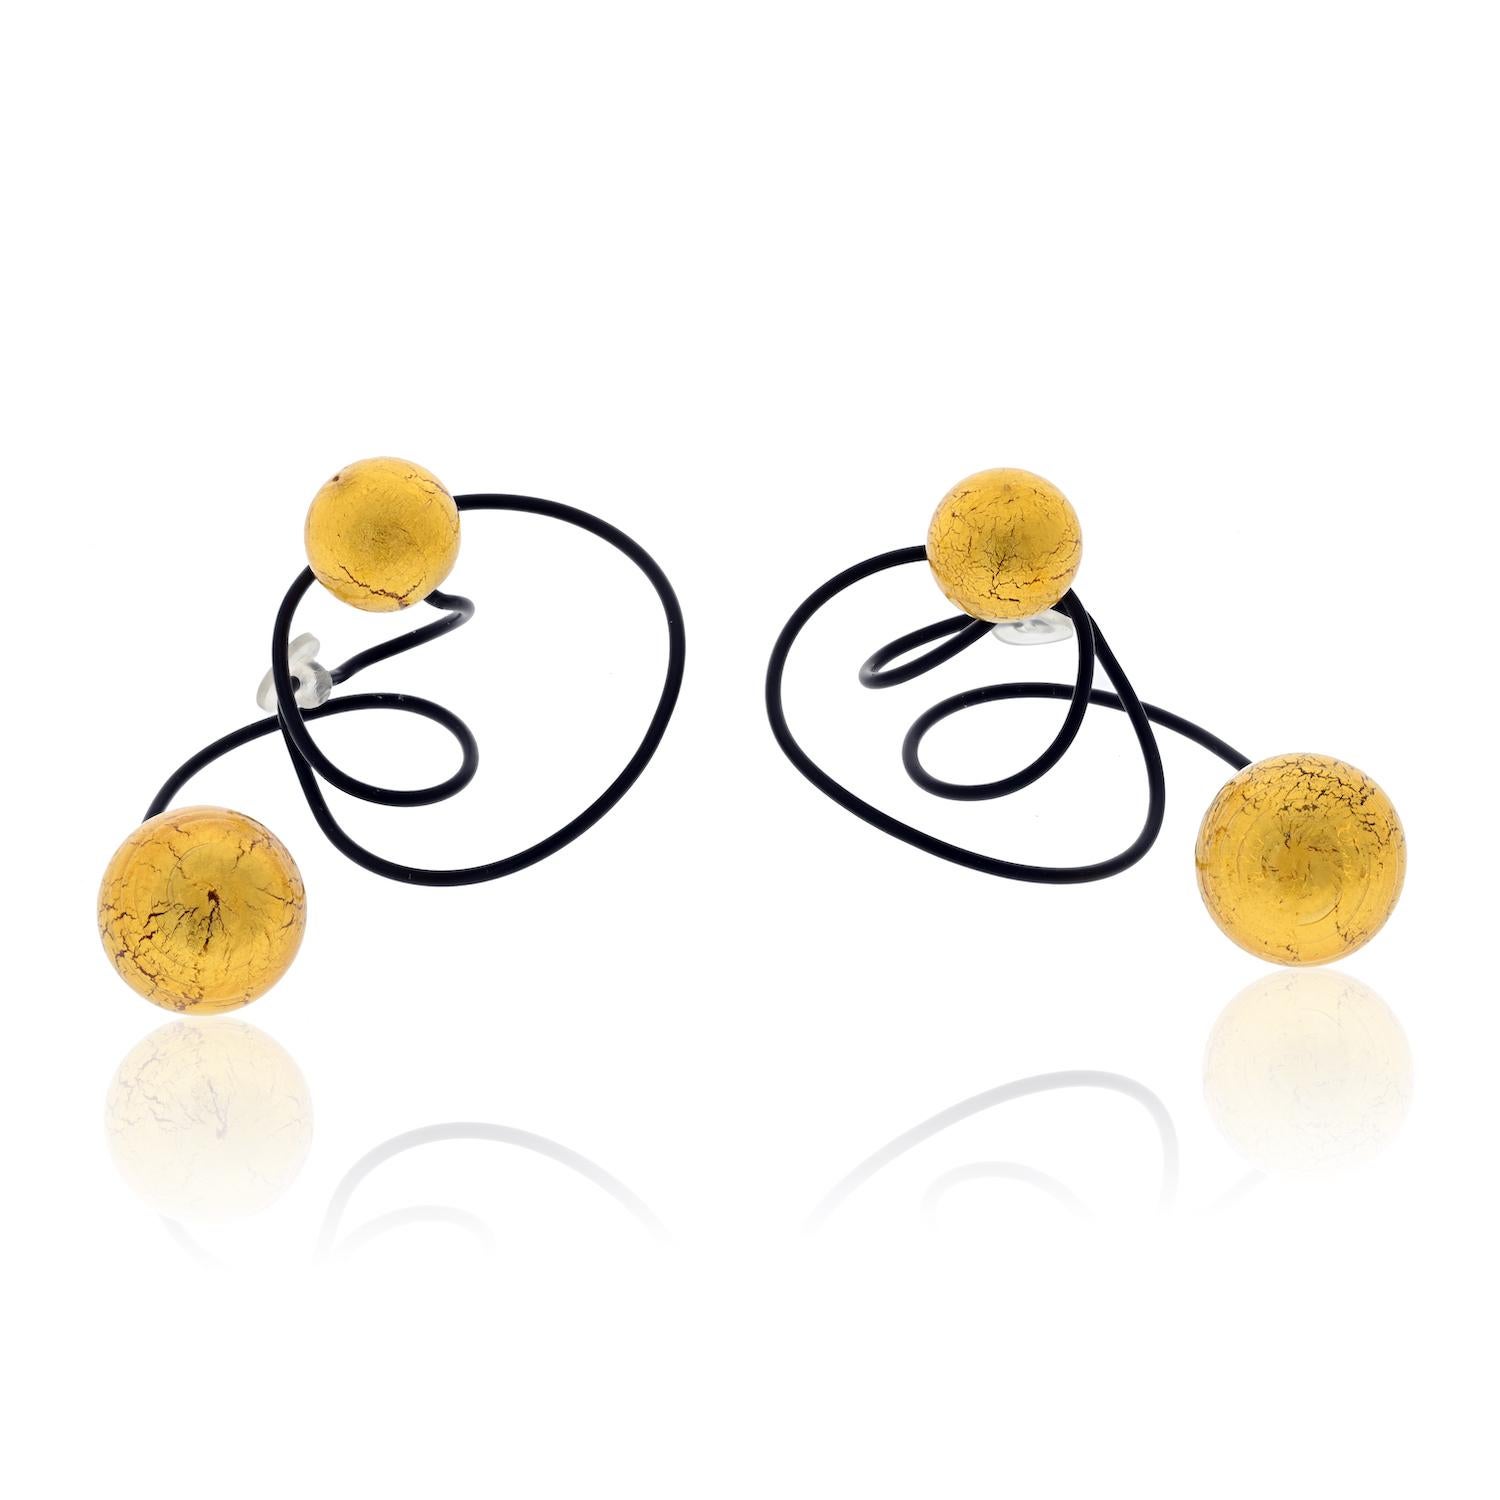 JAR Paris Carnaval a Venise Earrings by Designer known as JAR - New York City Born Joel Arthur Rosenthal of Paris

Inspired by Science and Nature

Black Titanium Wire & Gold Venetian Glass Ball Details on each end

Perfect Condition!!

Earrings